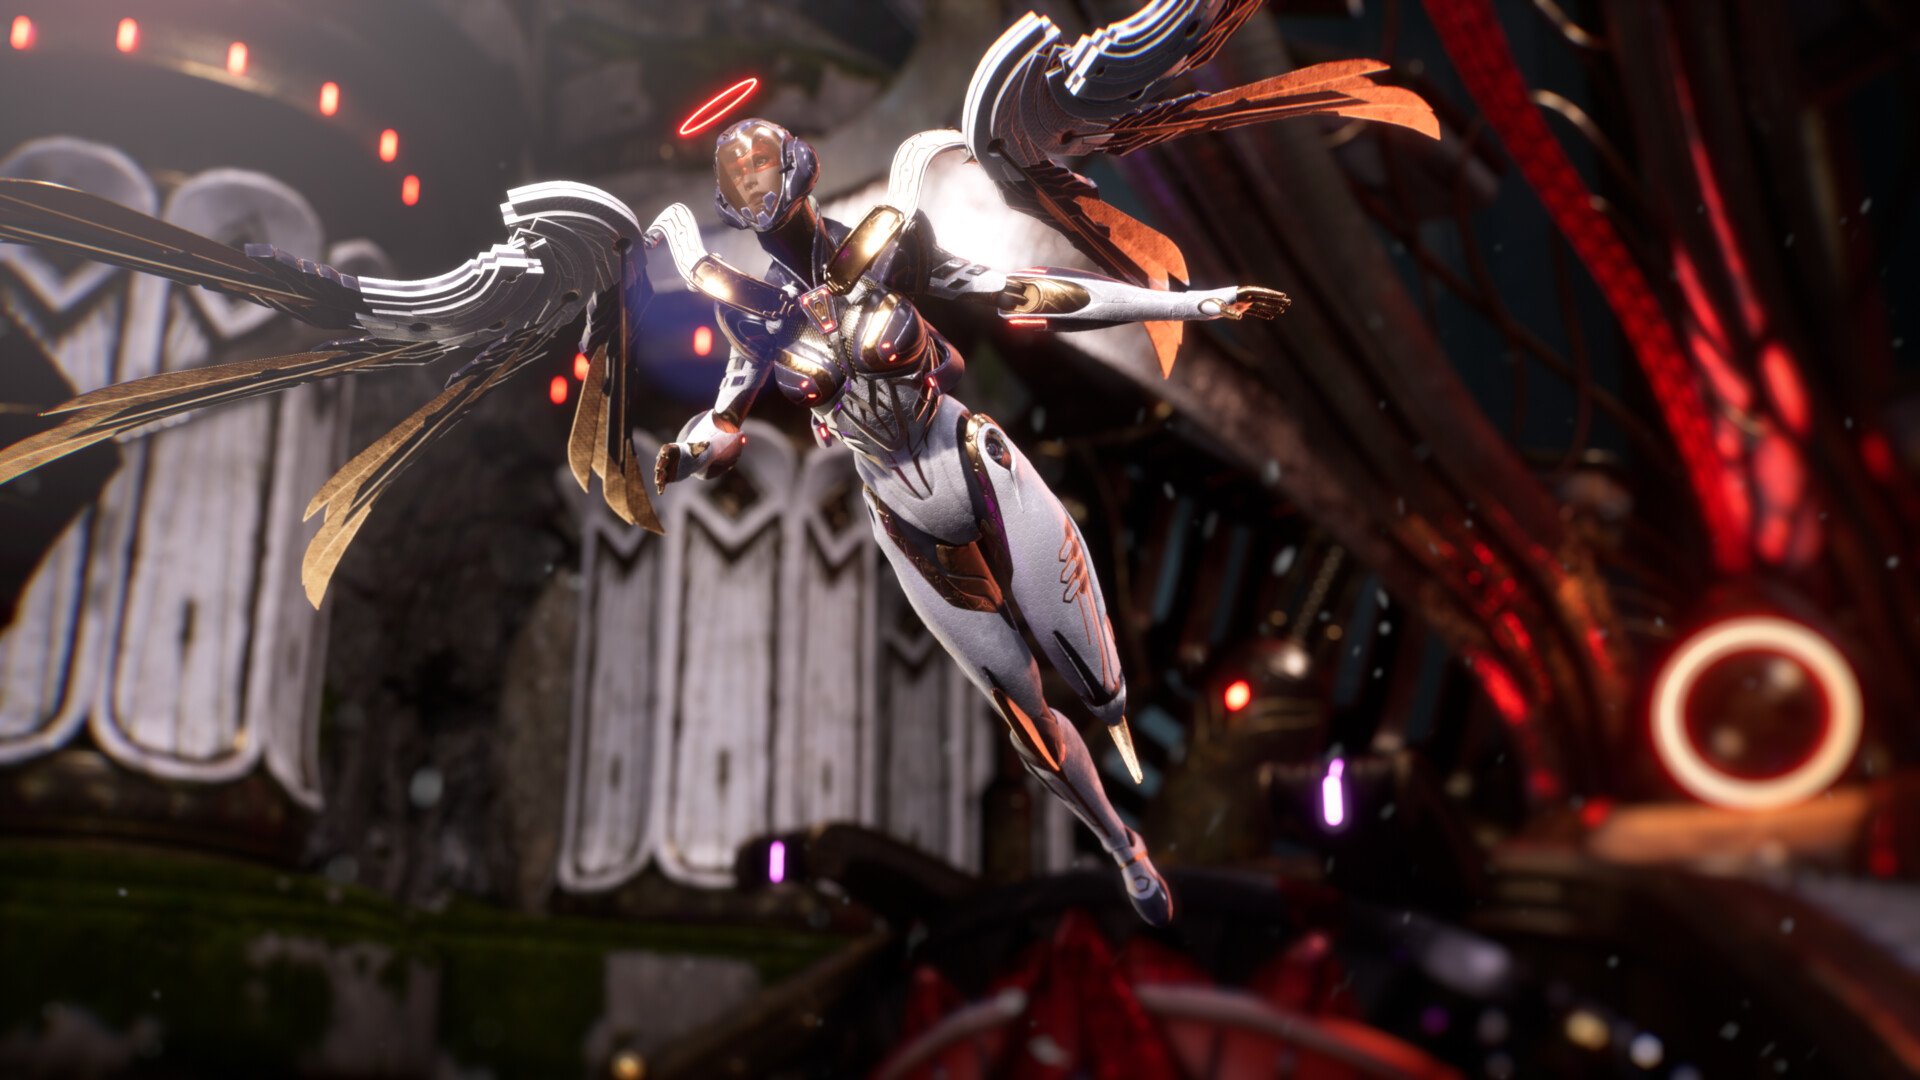 # PARAGON: The Overprime to end service on April 22